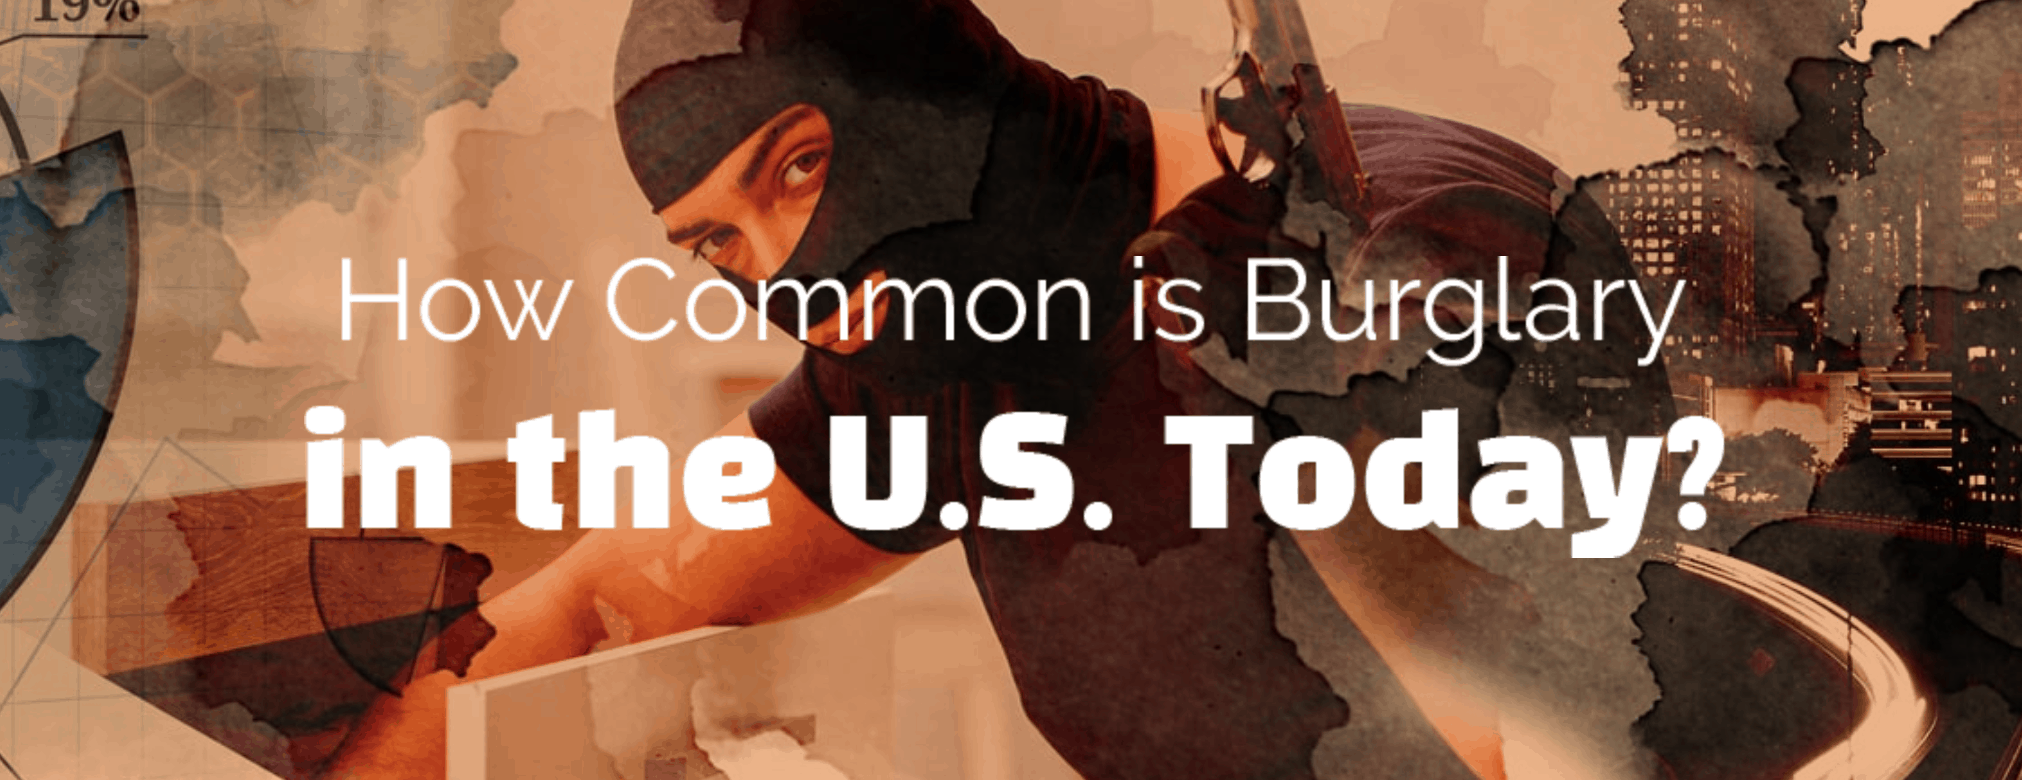 How Common is Burglary in the U.S.? Featured Image